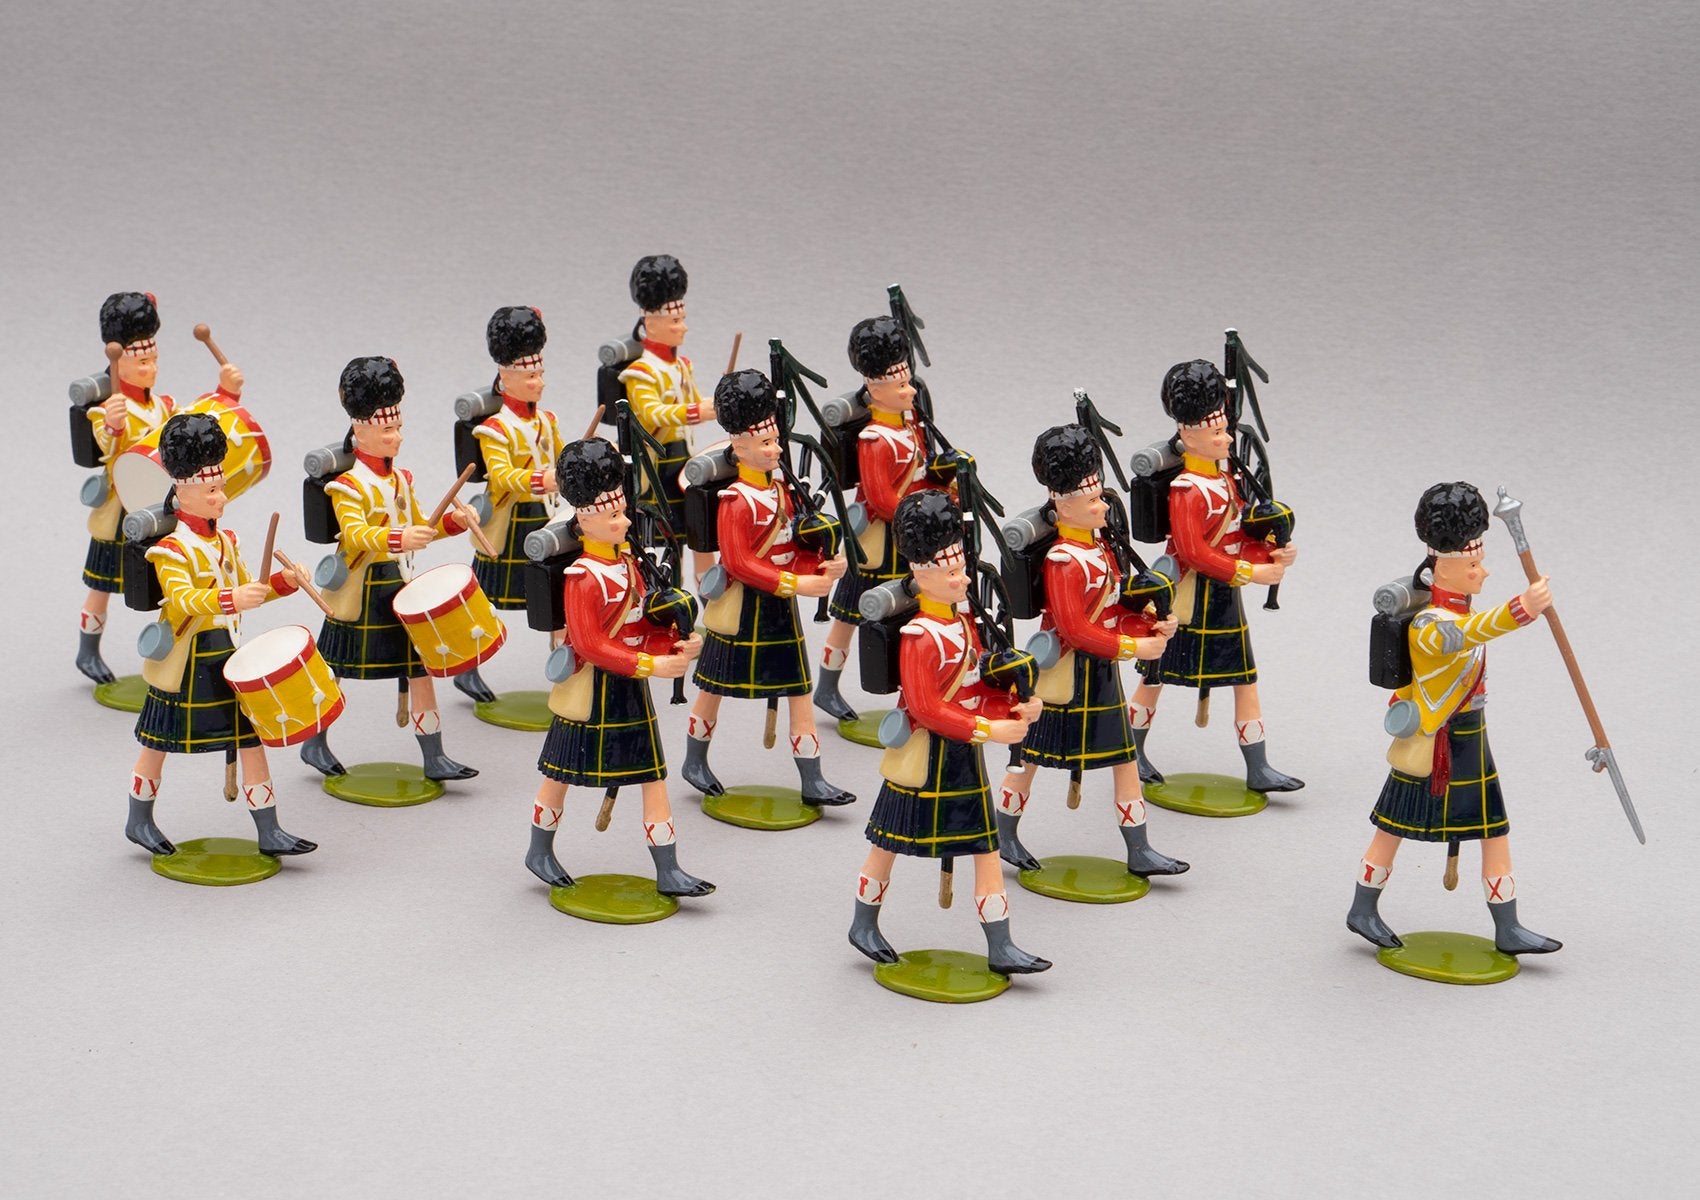 Set 121a Pipe band of the Gordon Highlanders, Waterloo 1815 | British Infantry | Napoleonic Wars | Combined sets 121 and 121a showing the combined Gordon Highlanders Pipe Band 1815 | Waterloo | © Imperial Productions | Sculpt by David Cowe